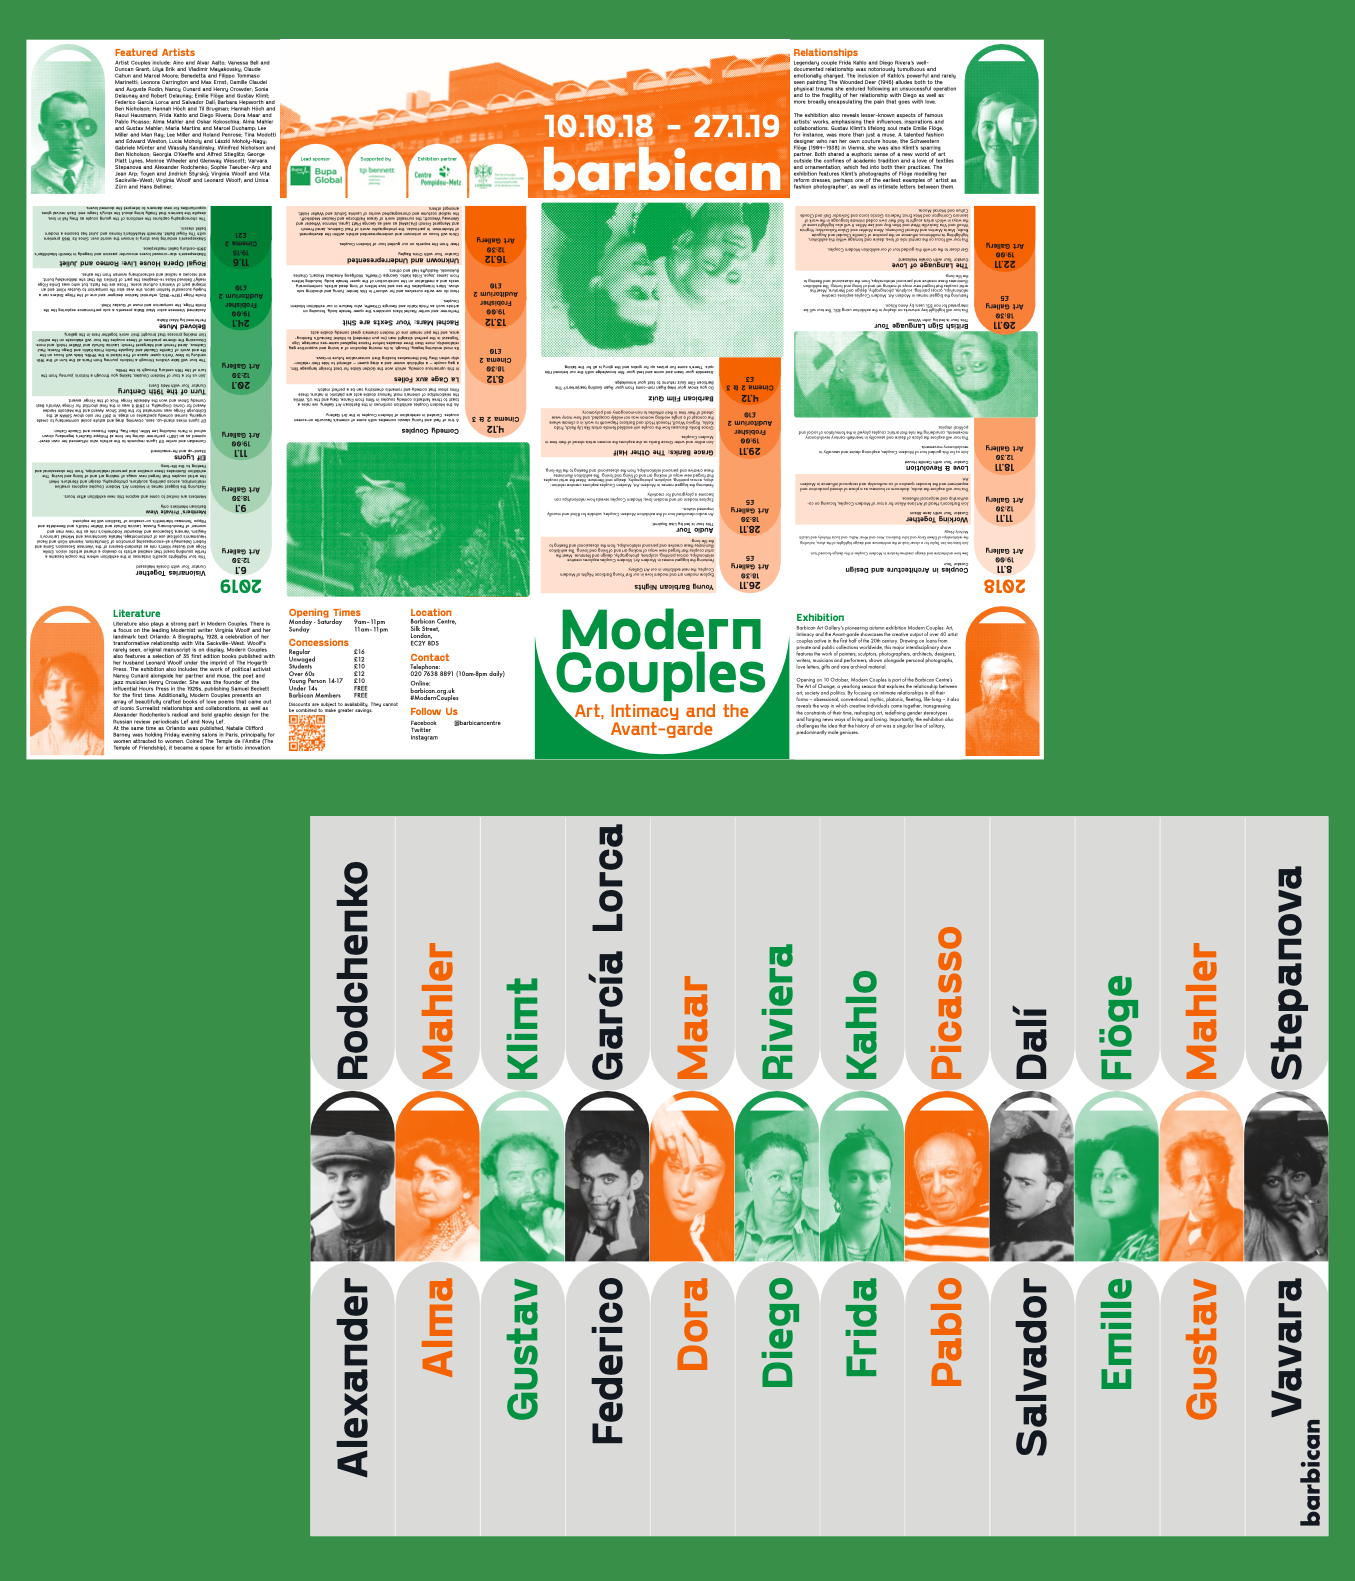 BA Graphic Design work by Daniel Matyus showing a museum broadsheet for the Barbican Museum for their Modern Couples Event.